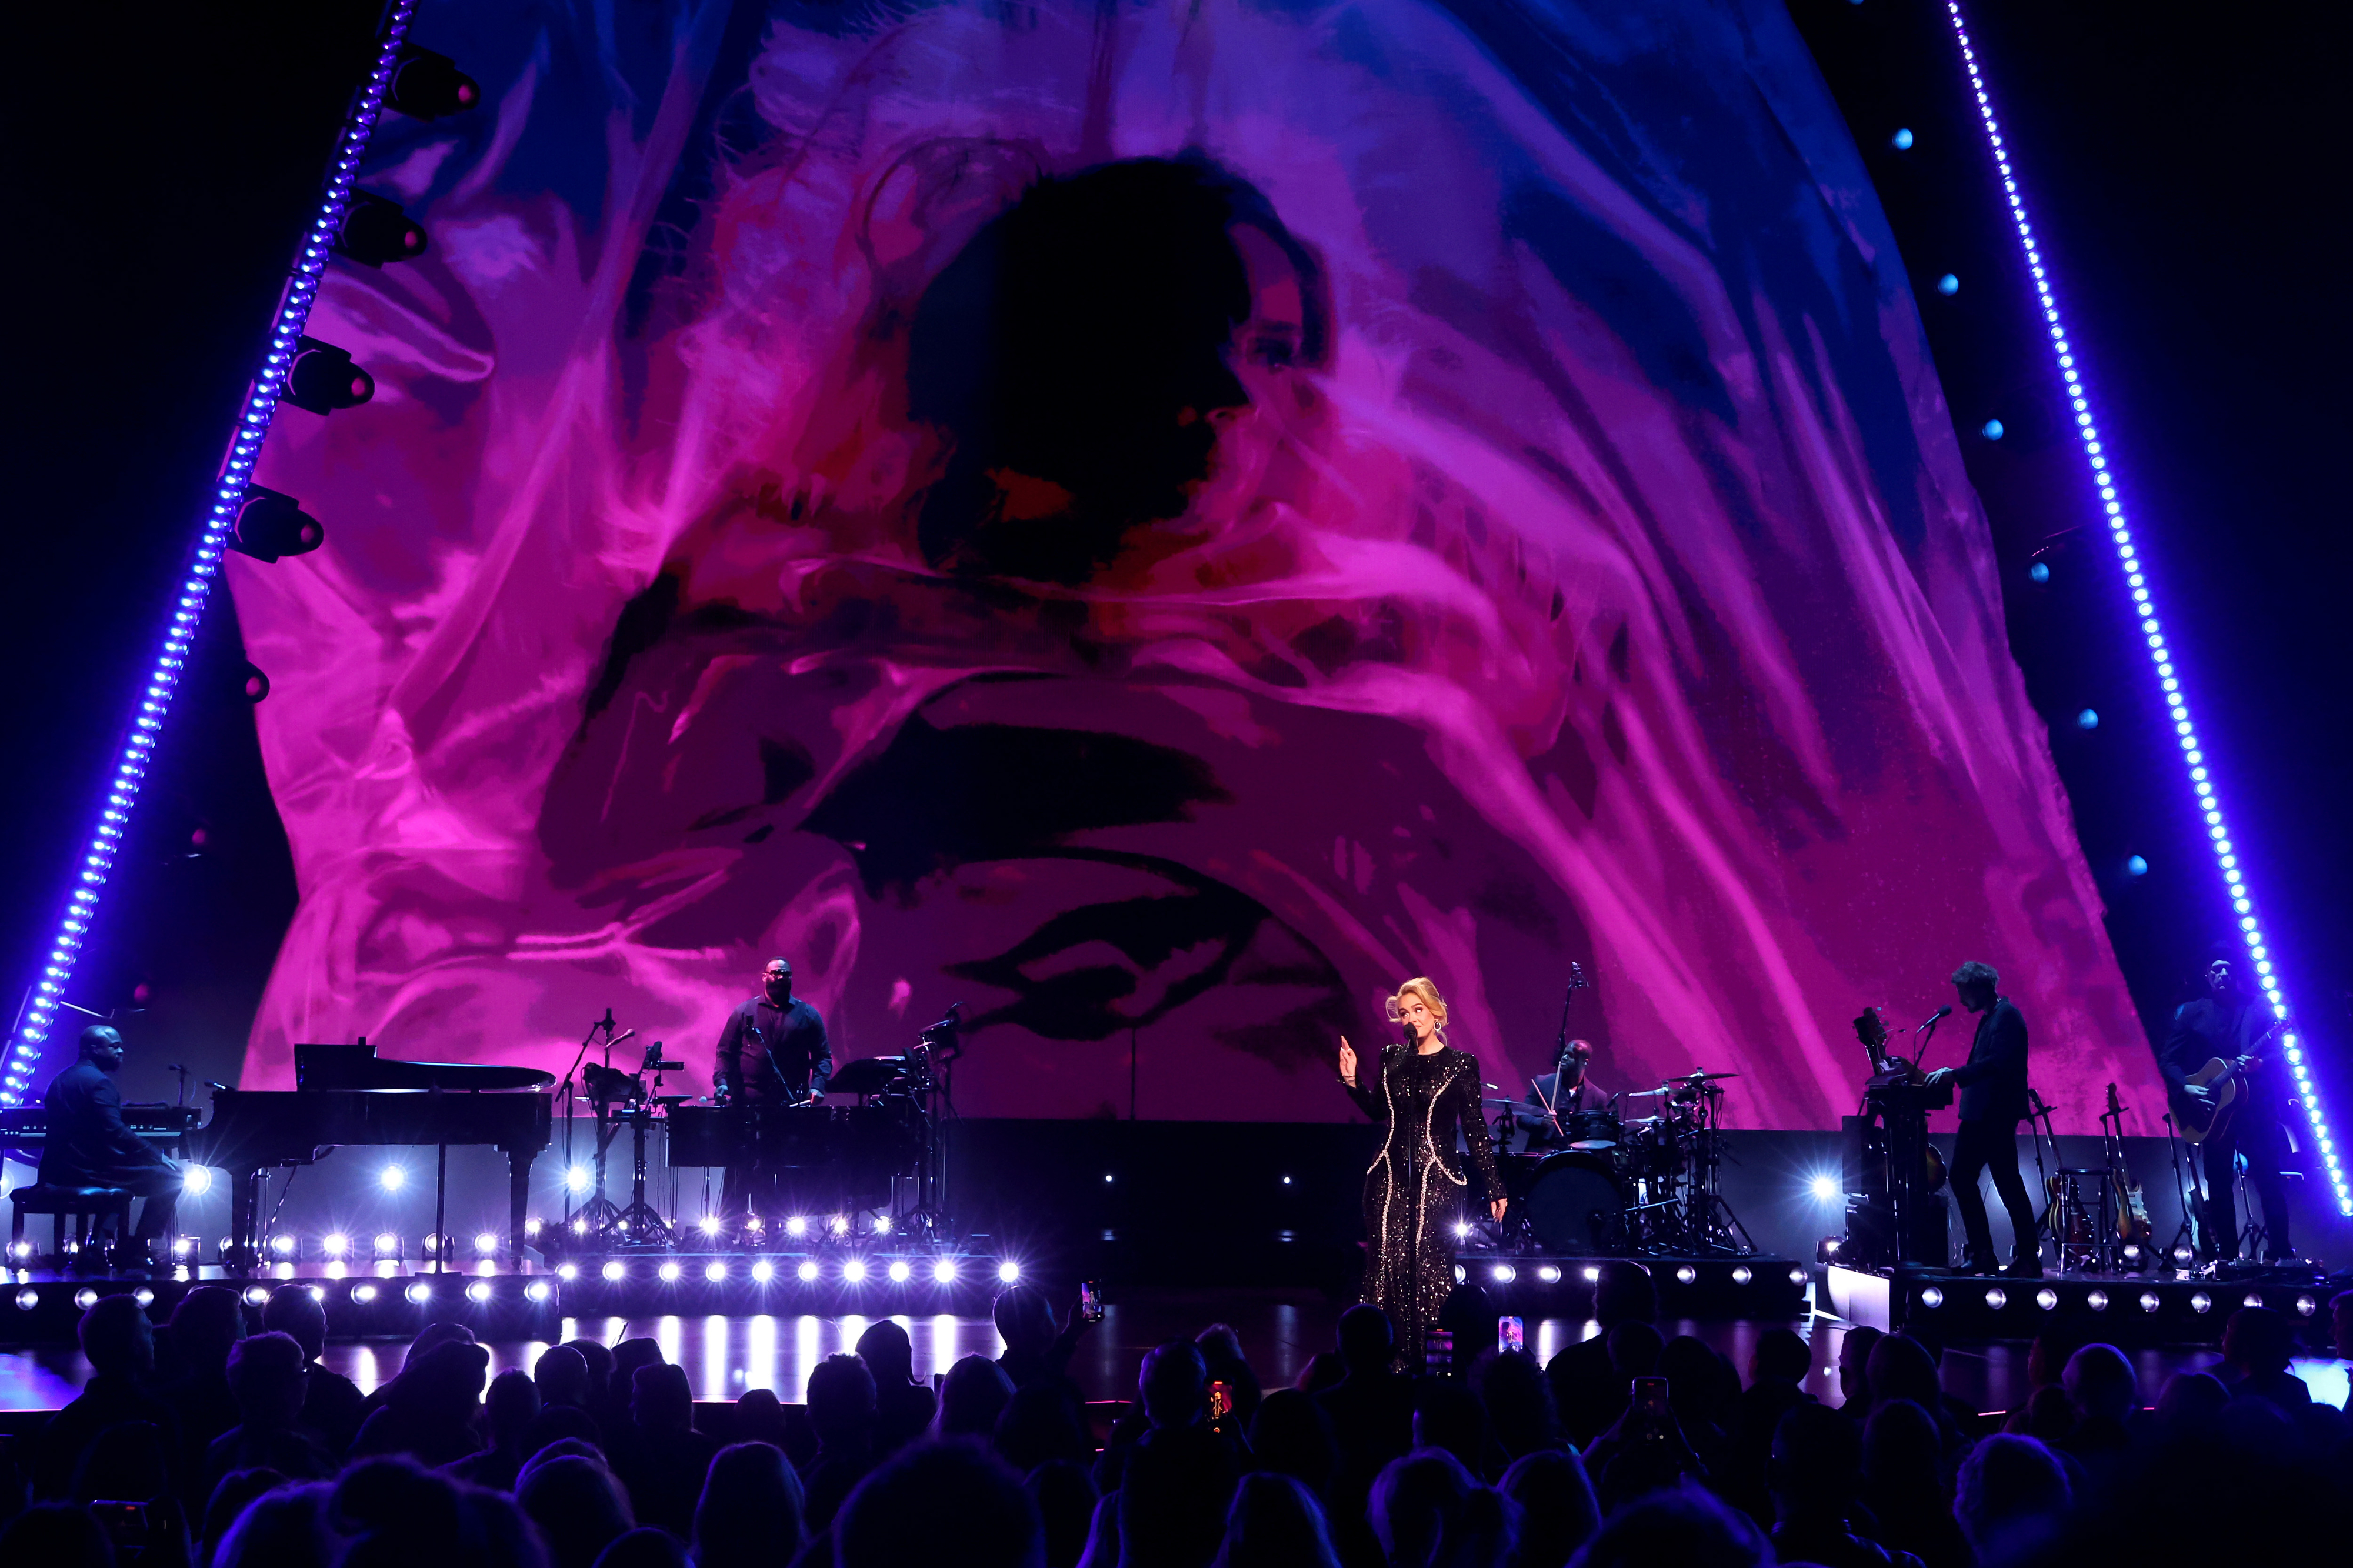 Adele performs on stage with her band, with a large pink abstract backdrop